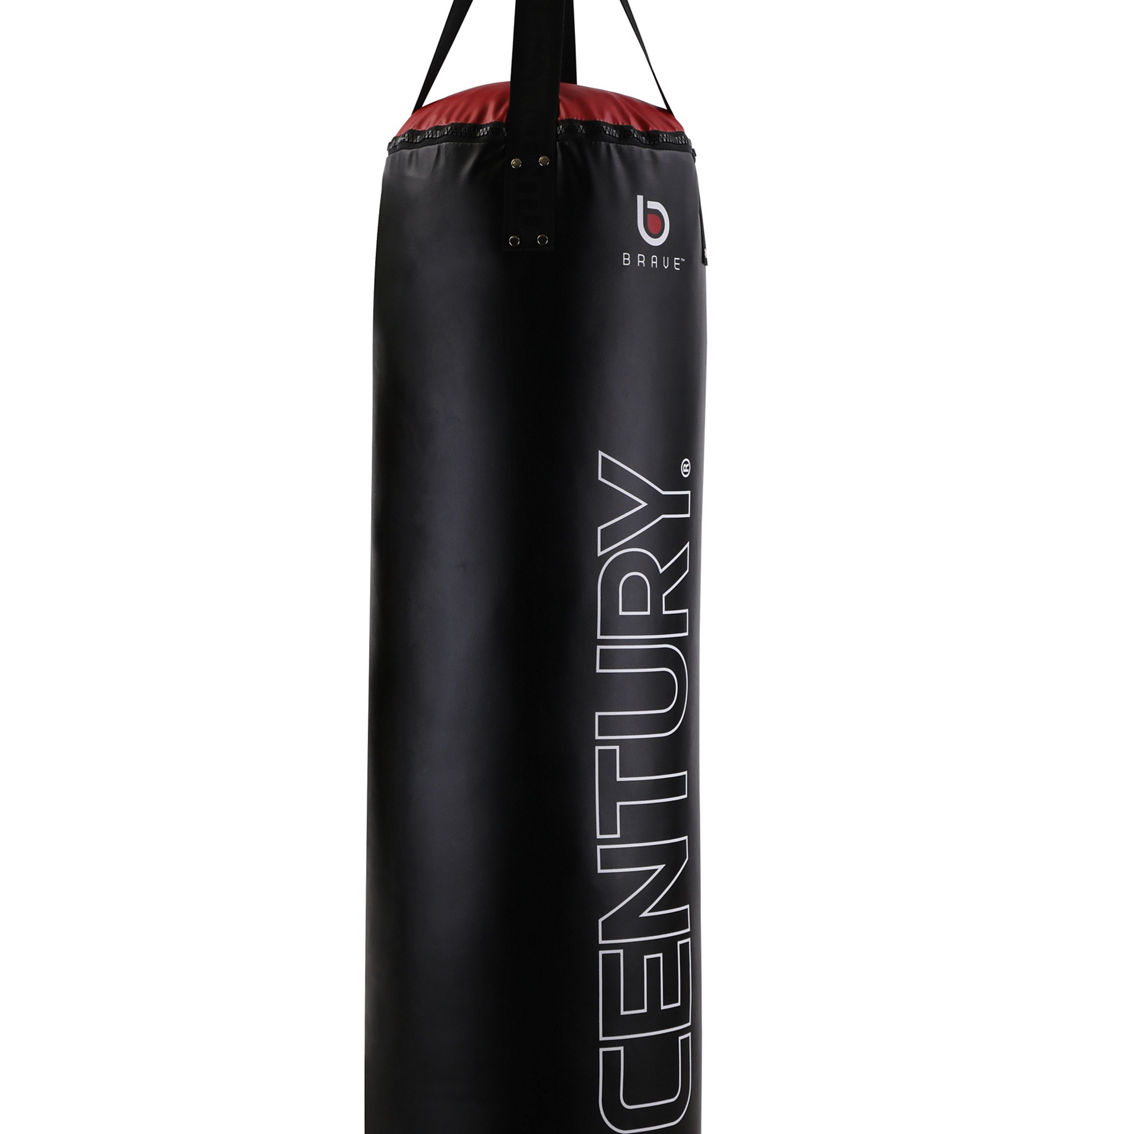 Brave 4.0 Heavy Bag 70 lbs - Image 2 of 2